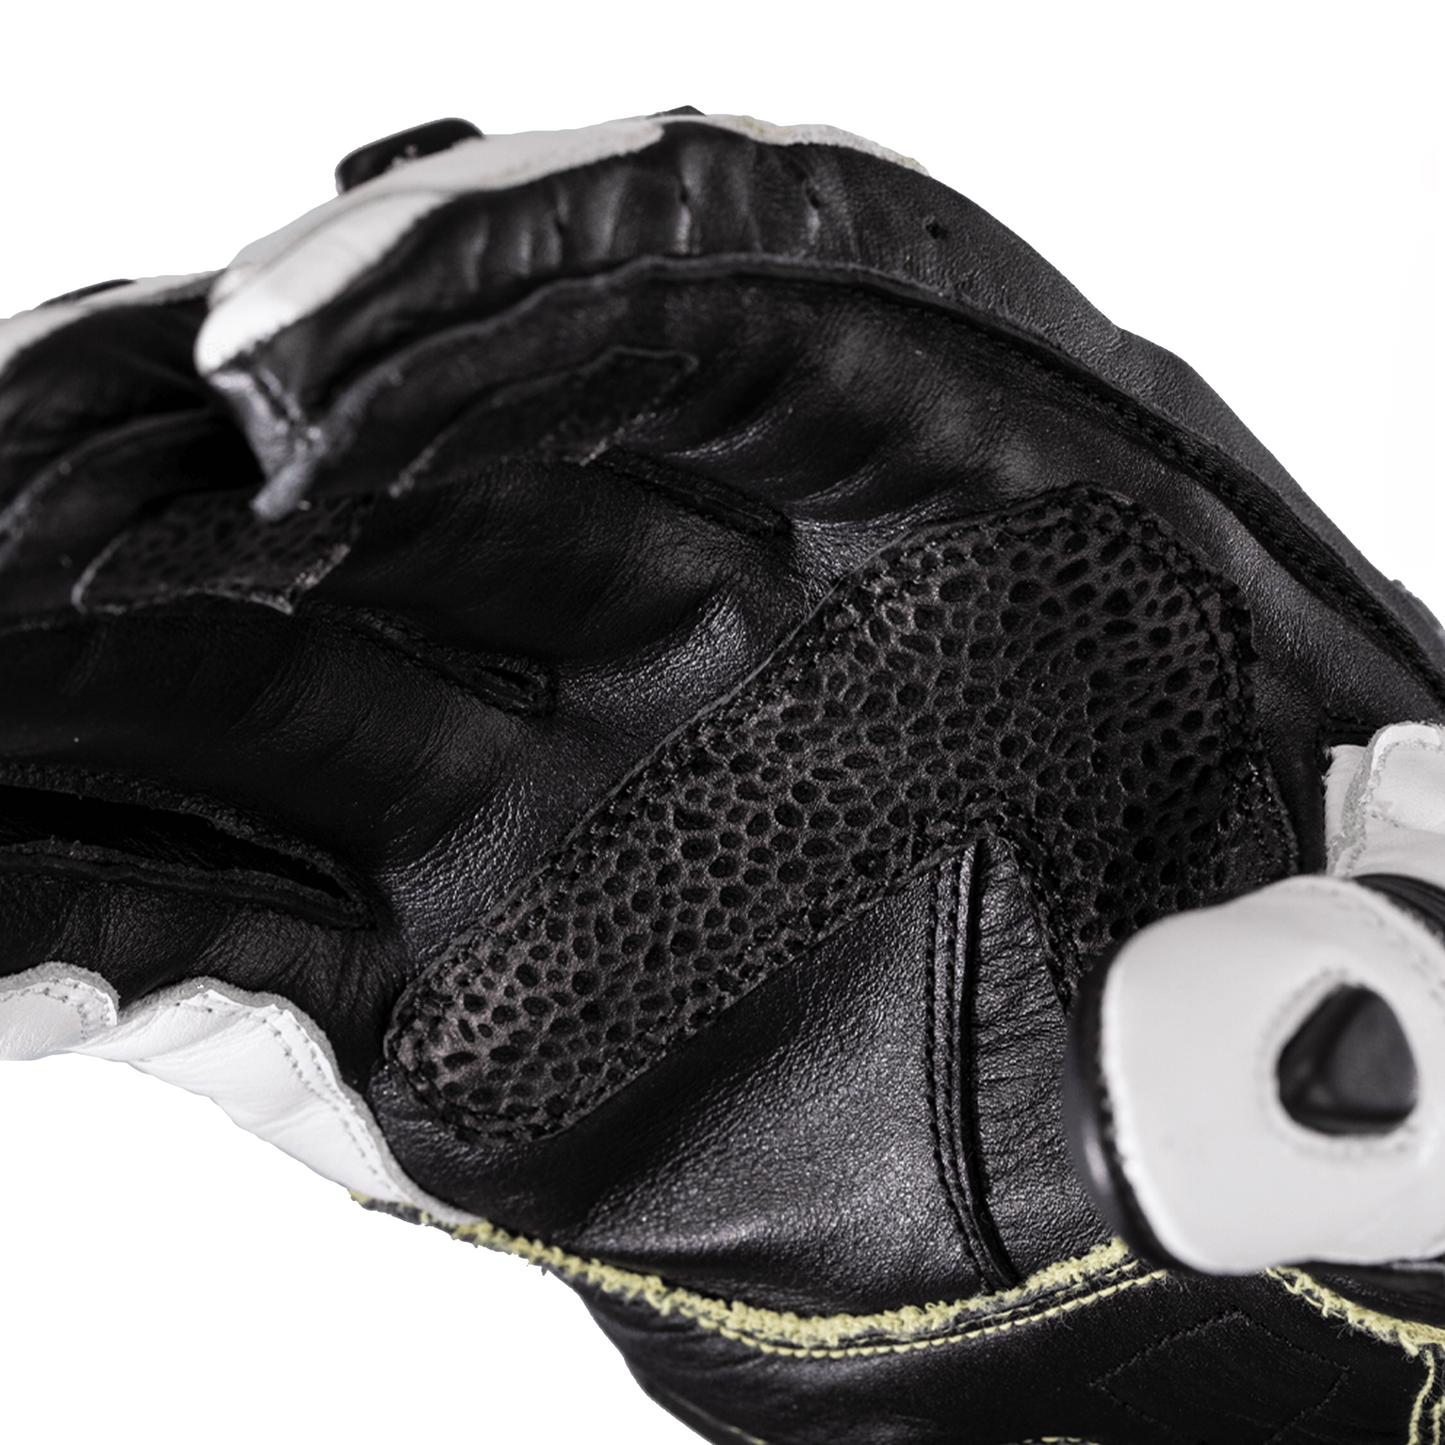 RST Tractech Evo 4 (CE) Gloves - White